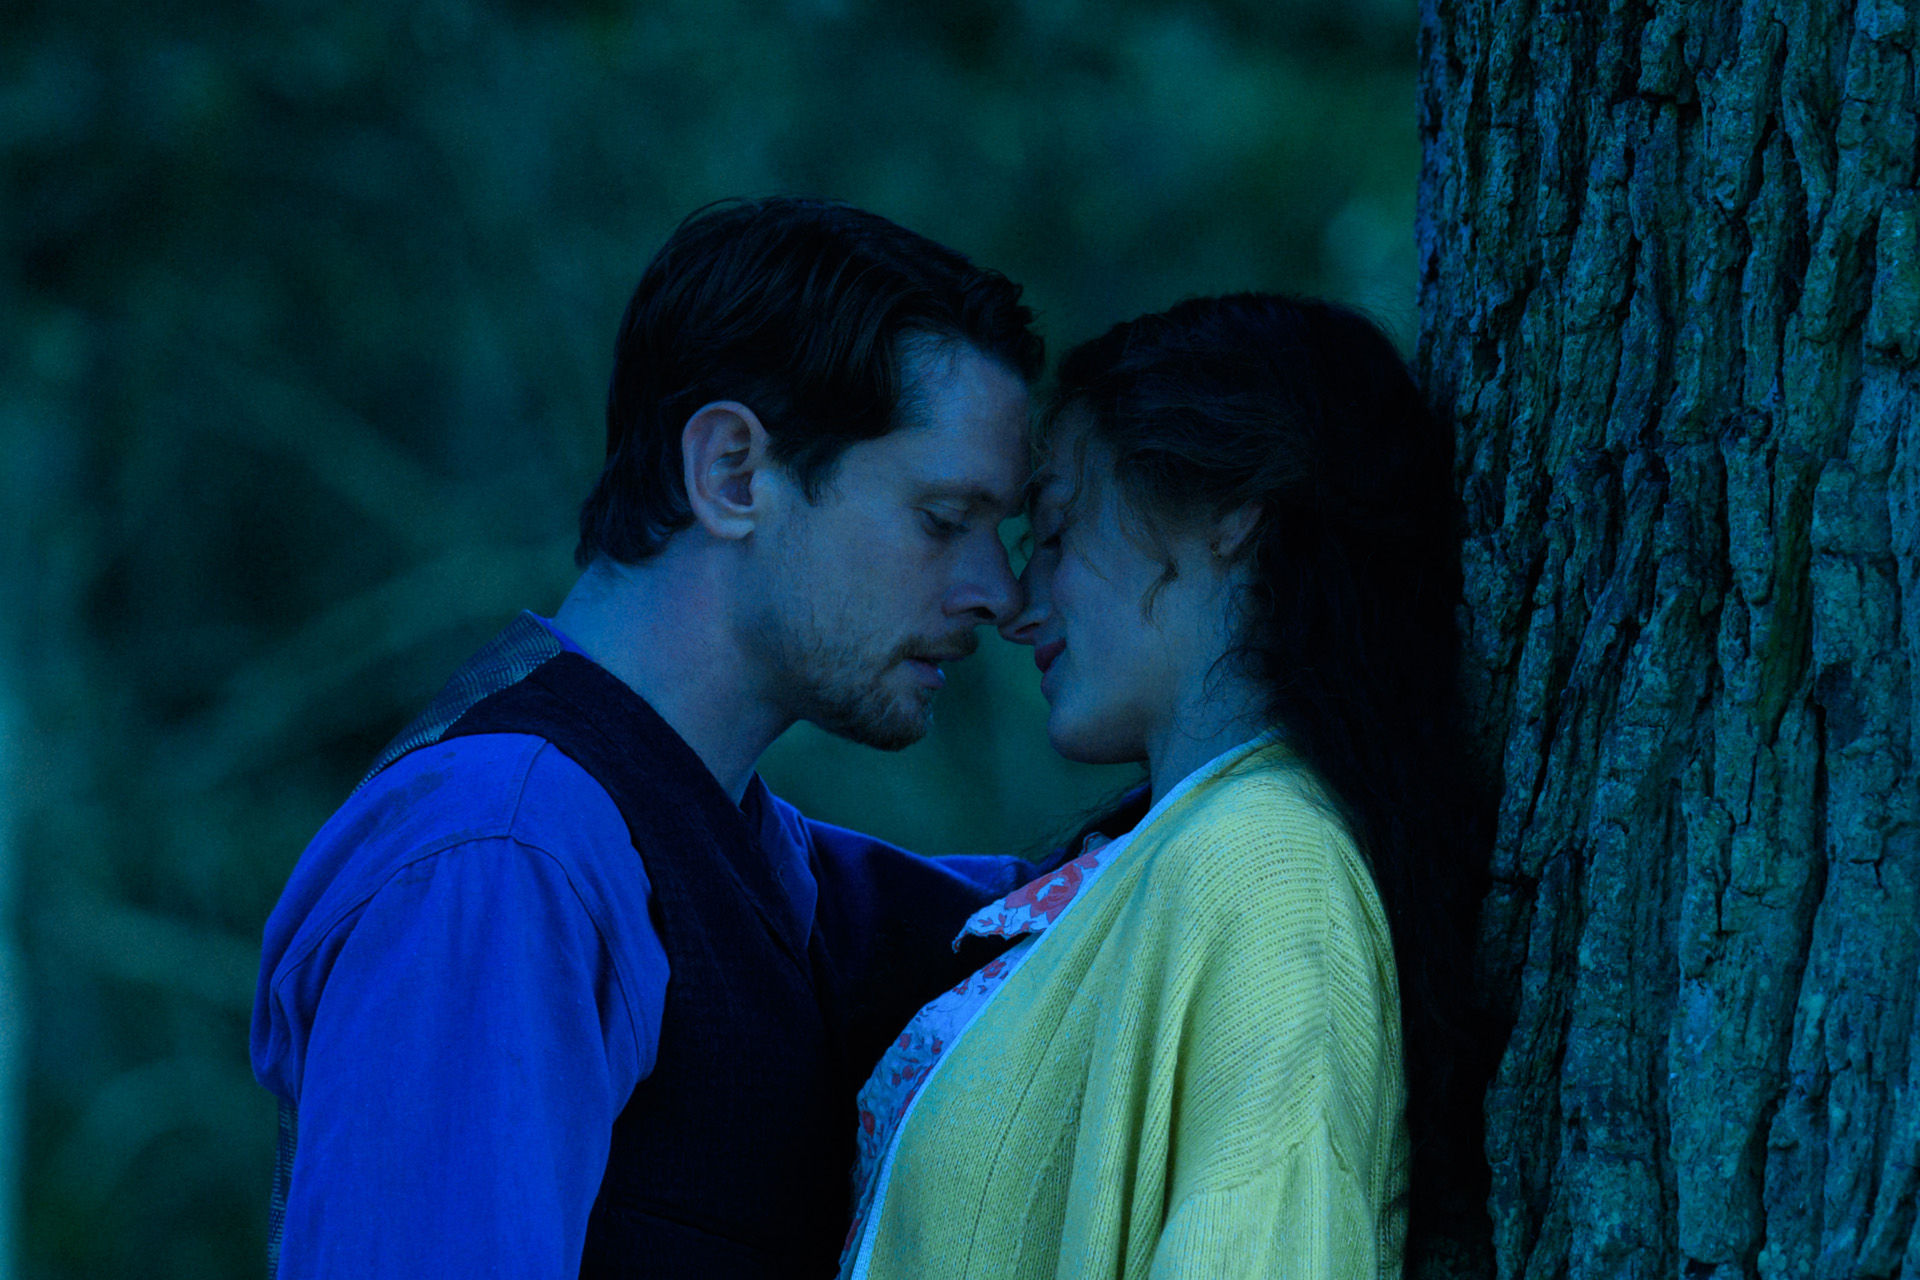 Jack O'Connell and Emma Corrin in Lady Chatterley's Lover